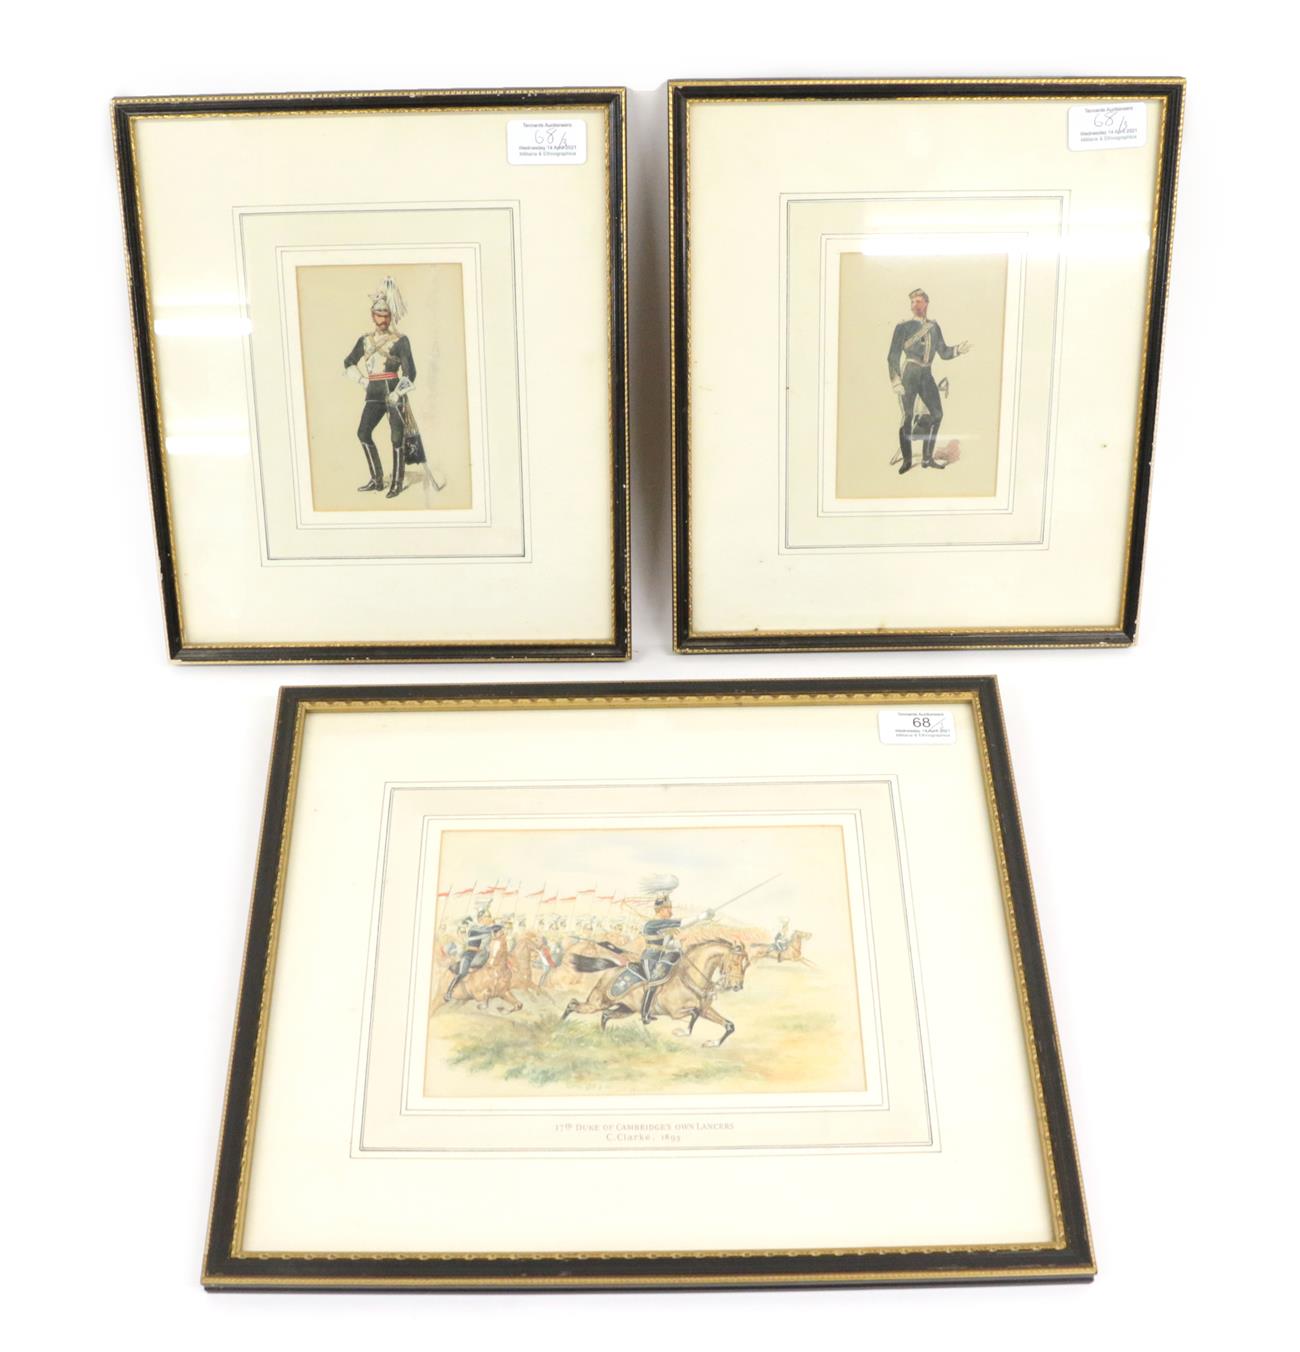 Lot 68 - C Clarke - 17th Duke of Cambridge's Own Lancers, signed and dated (18)95, watercolour, 14cm by...